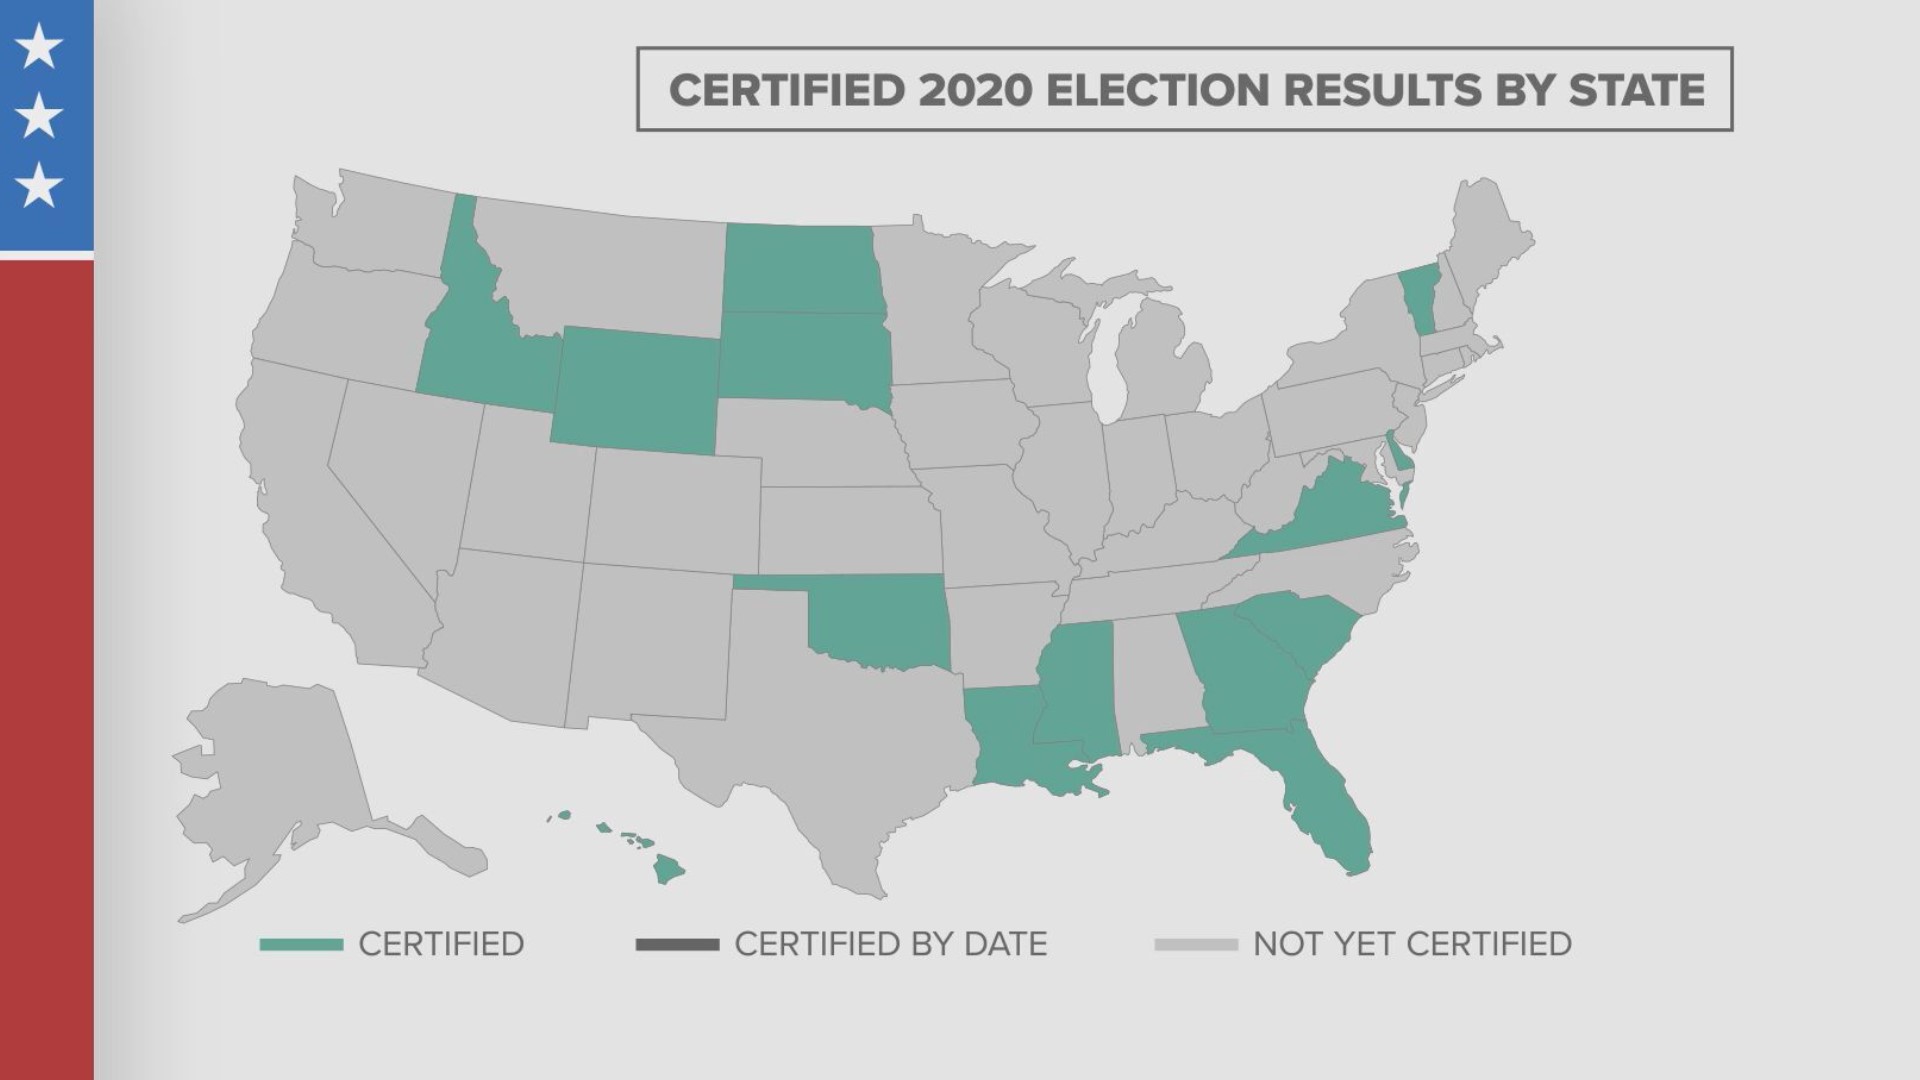 Fourteen states have certified their voting totals for the 2020 general election.